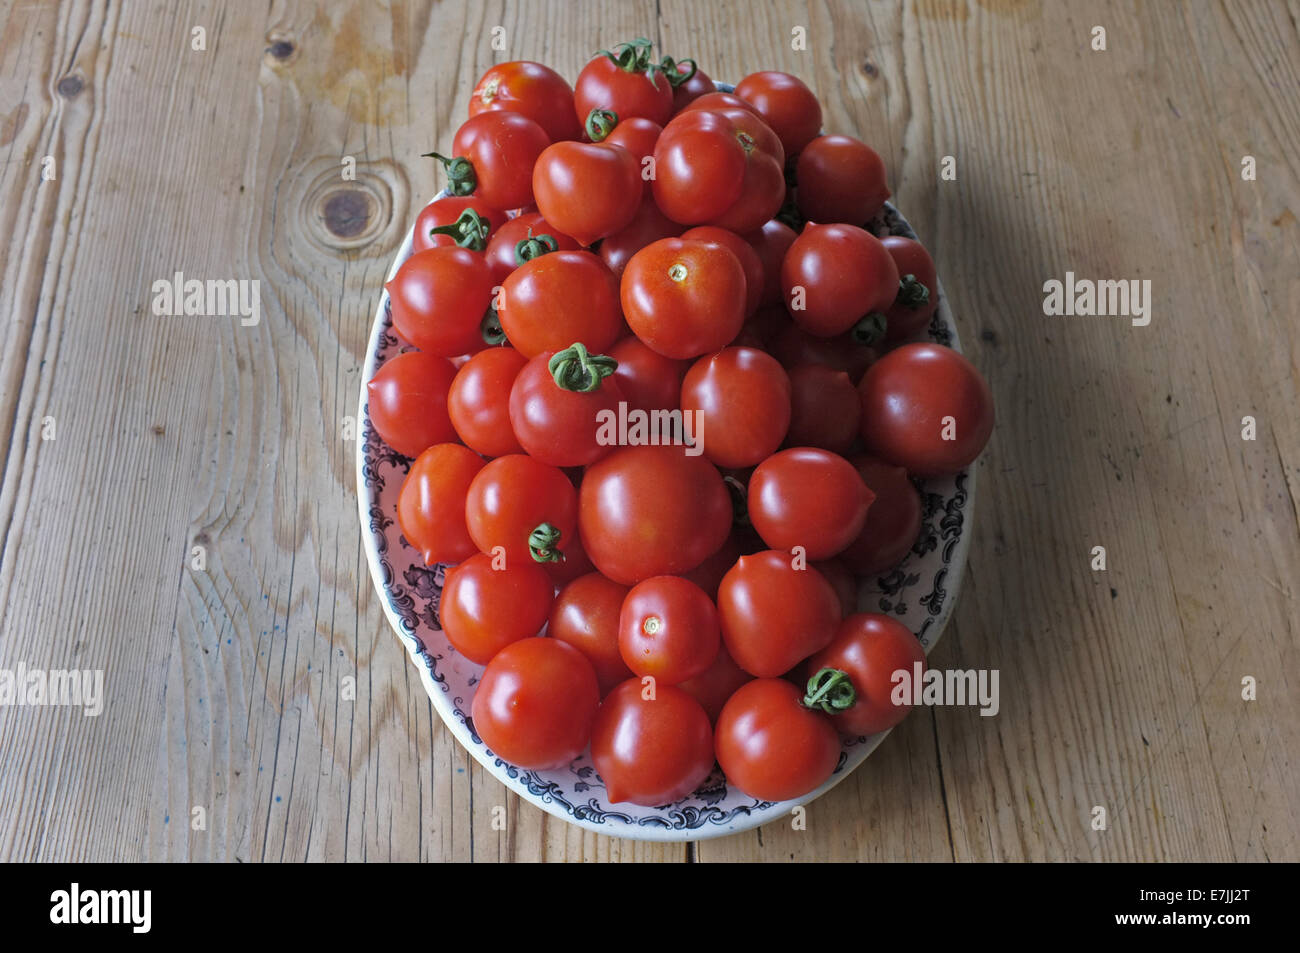 A dish full of home grown tomatoes Stock Photo